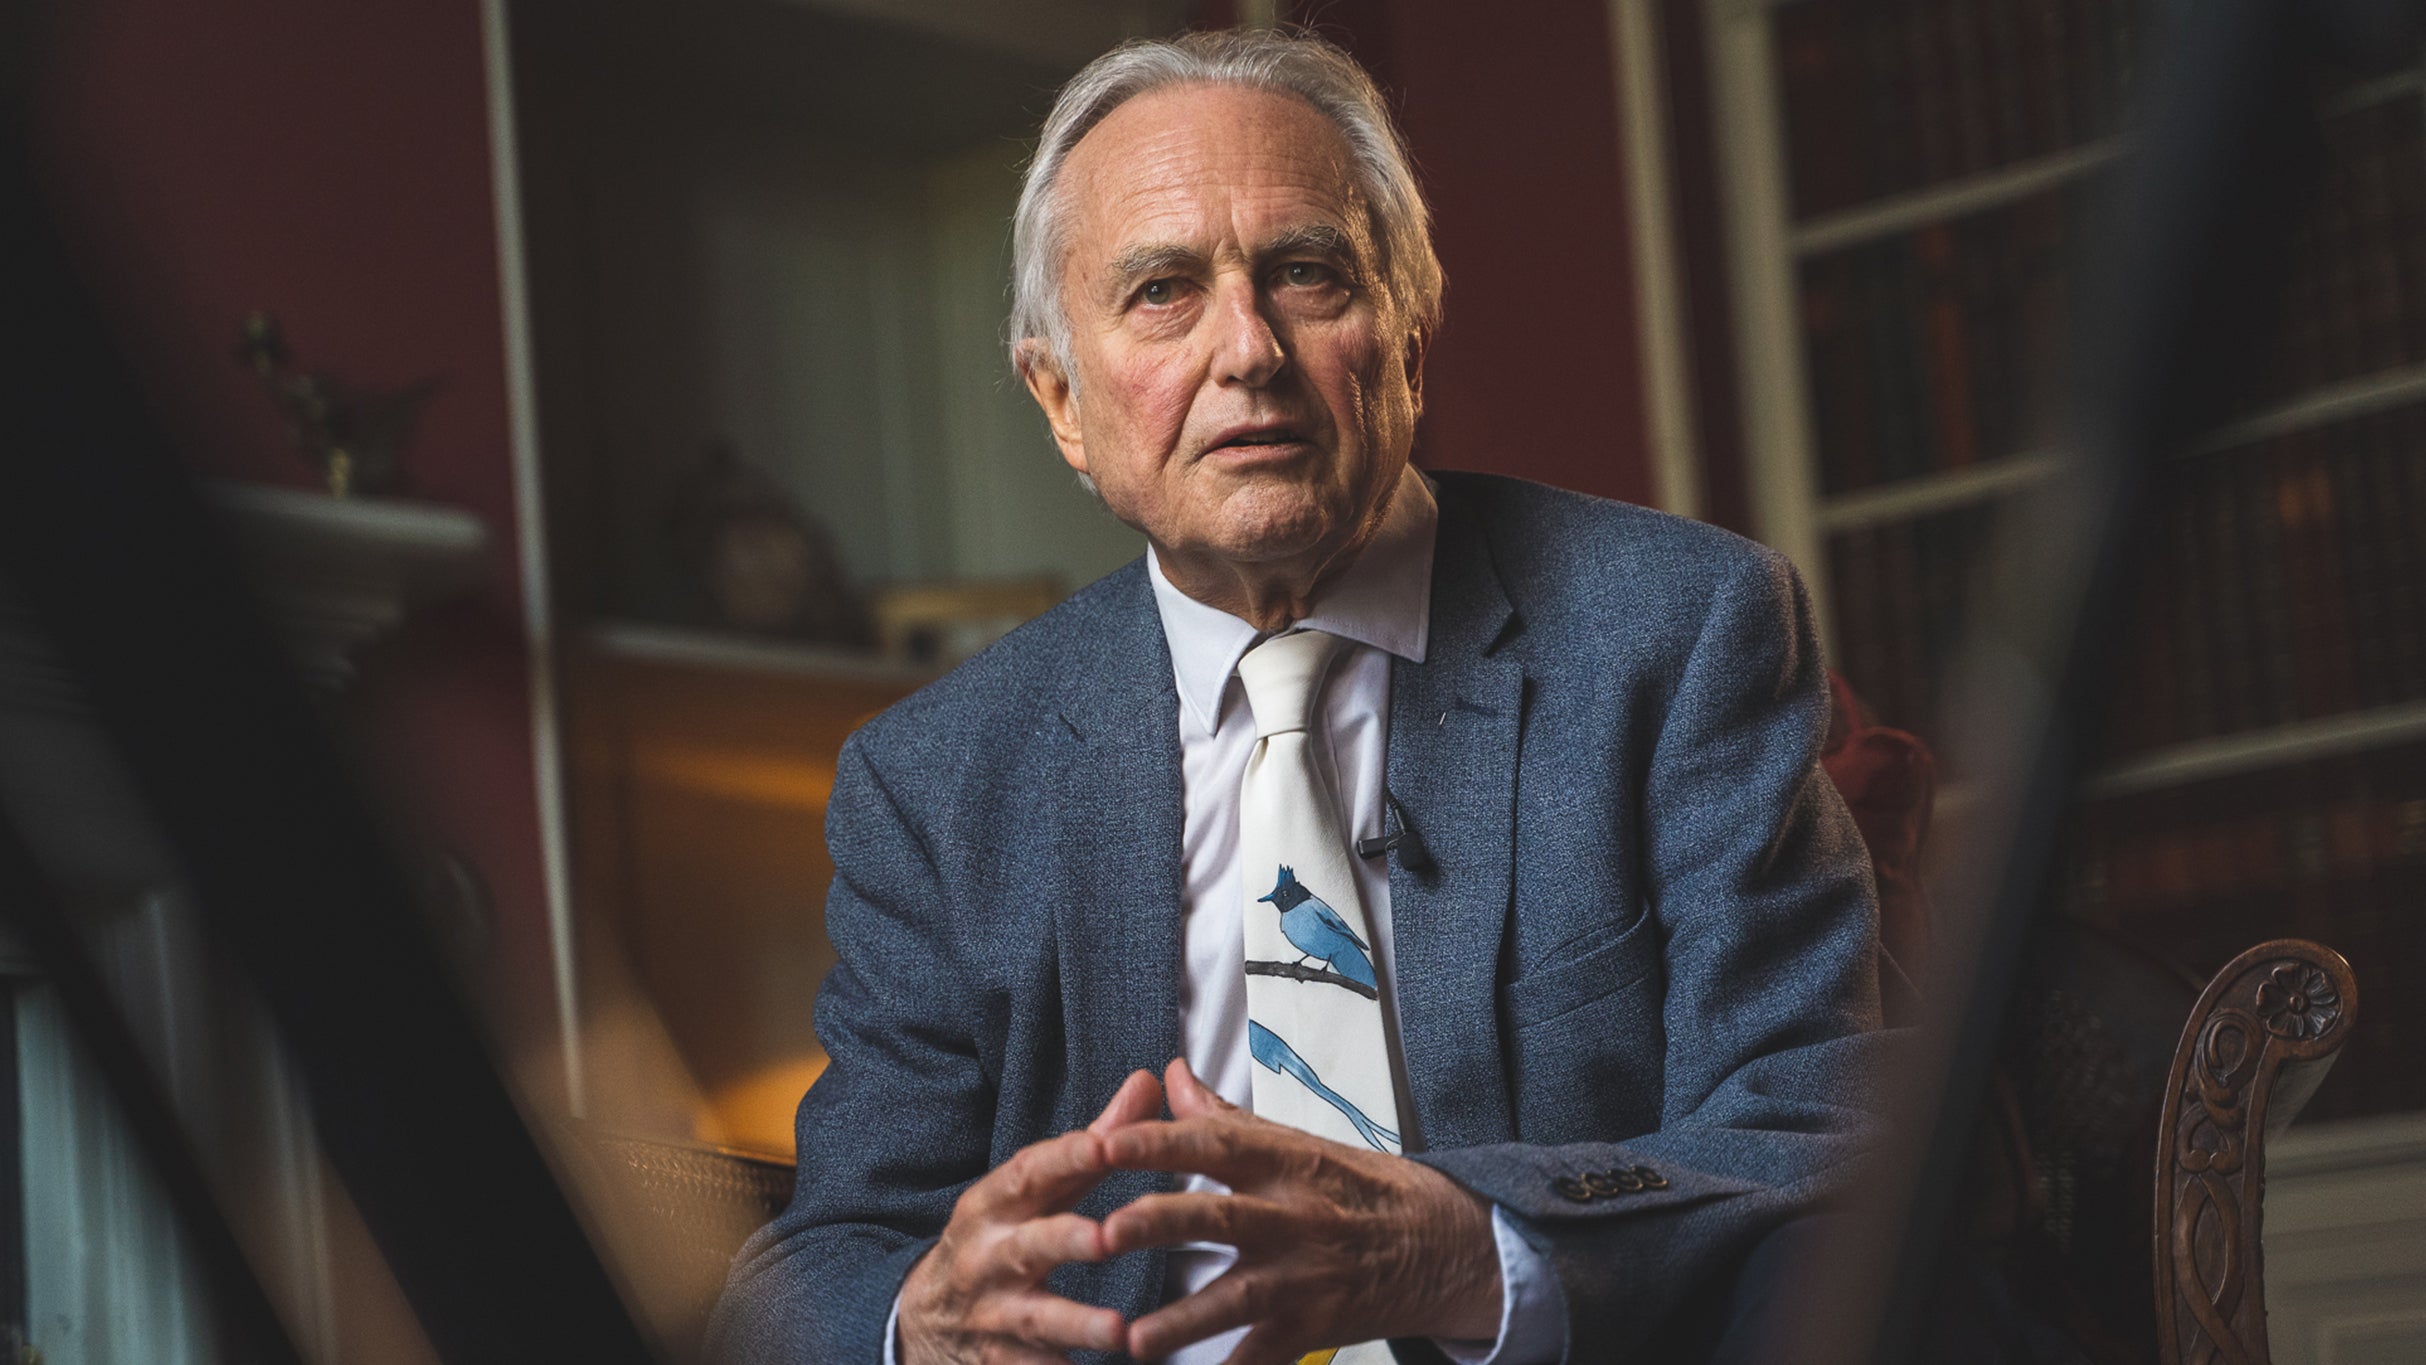 An Evening with Richard Dawkins and Friends  in Medford promo photo for Official Platinum presale offer code